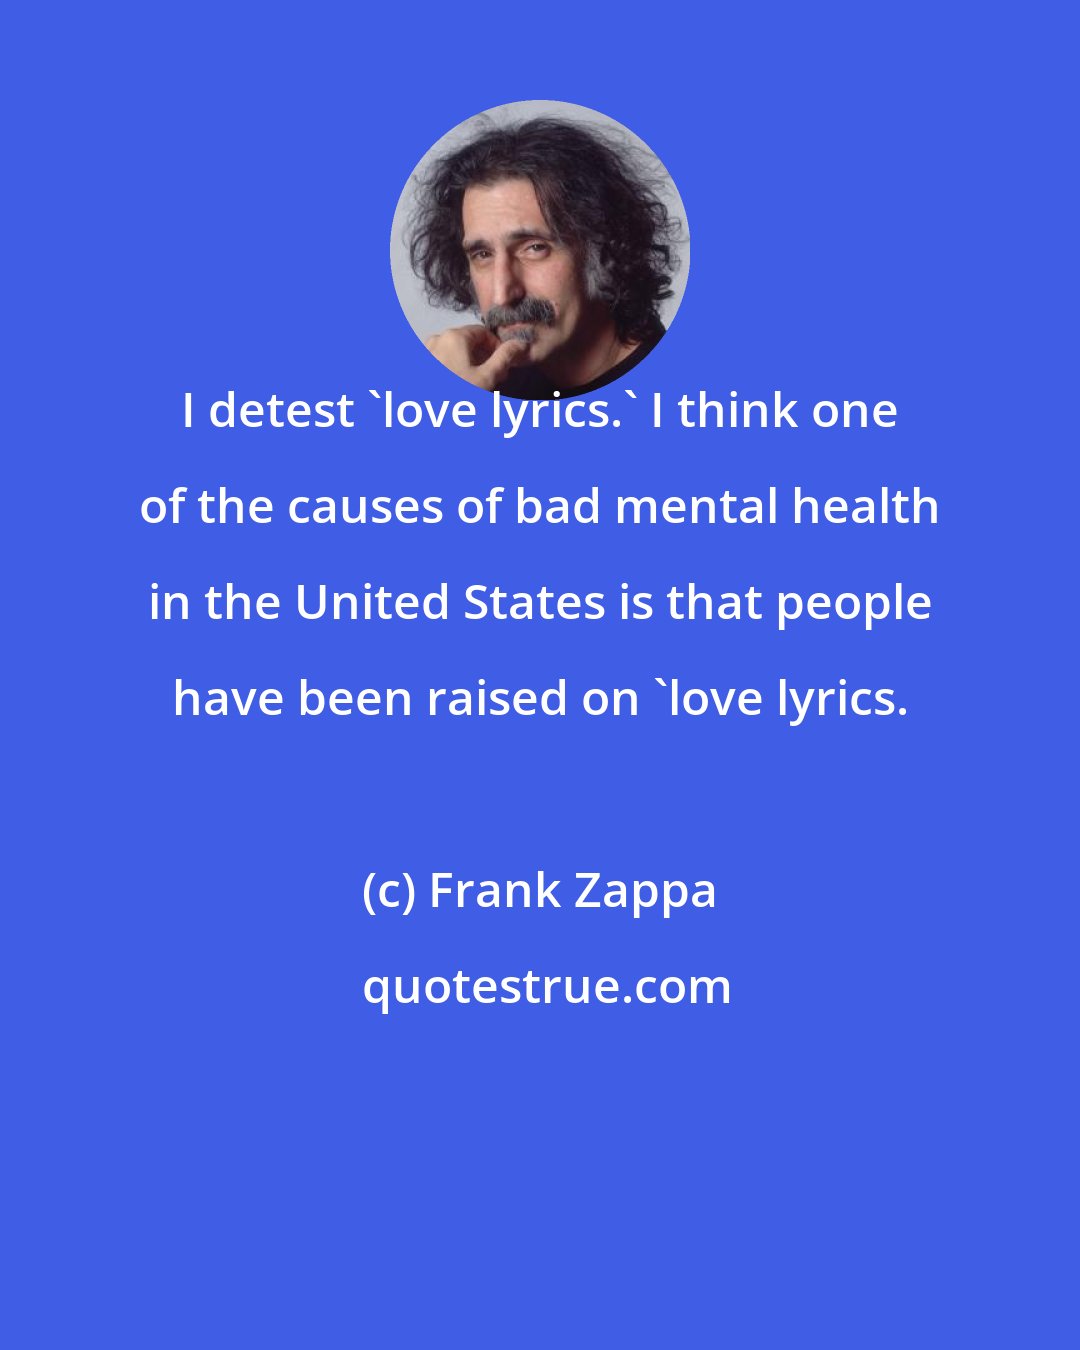 Frank Zappa: I detest 'love lyrics.' I think one of the causes of bad mental health in the United States is that people have been raised on 'love lyrics.